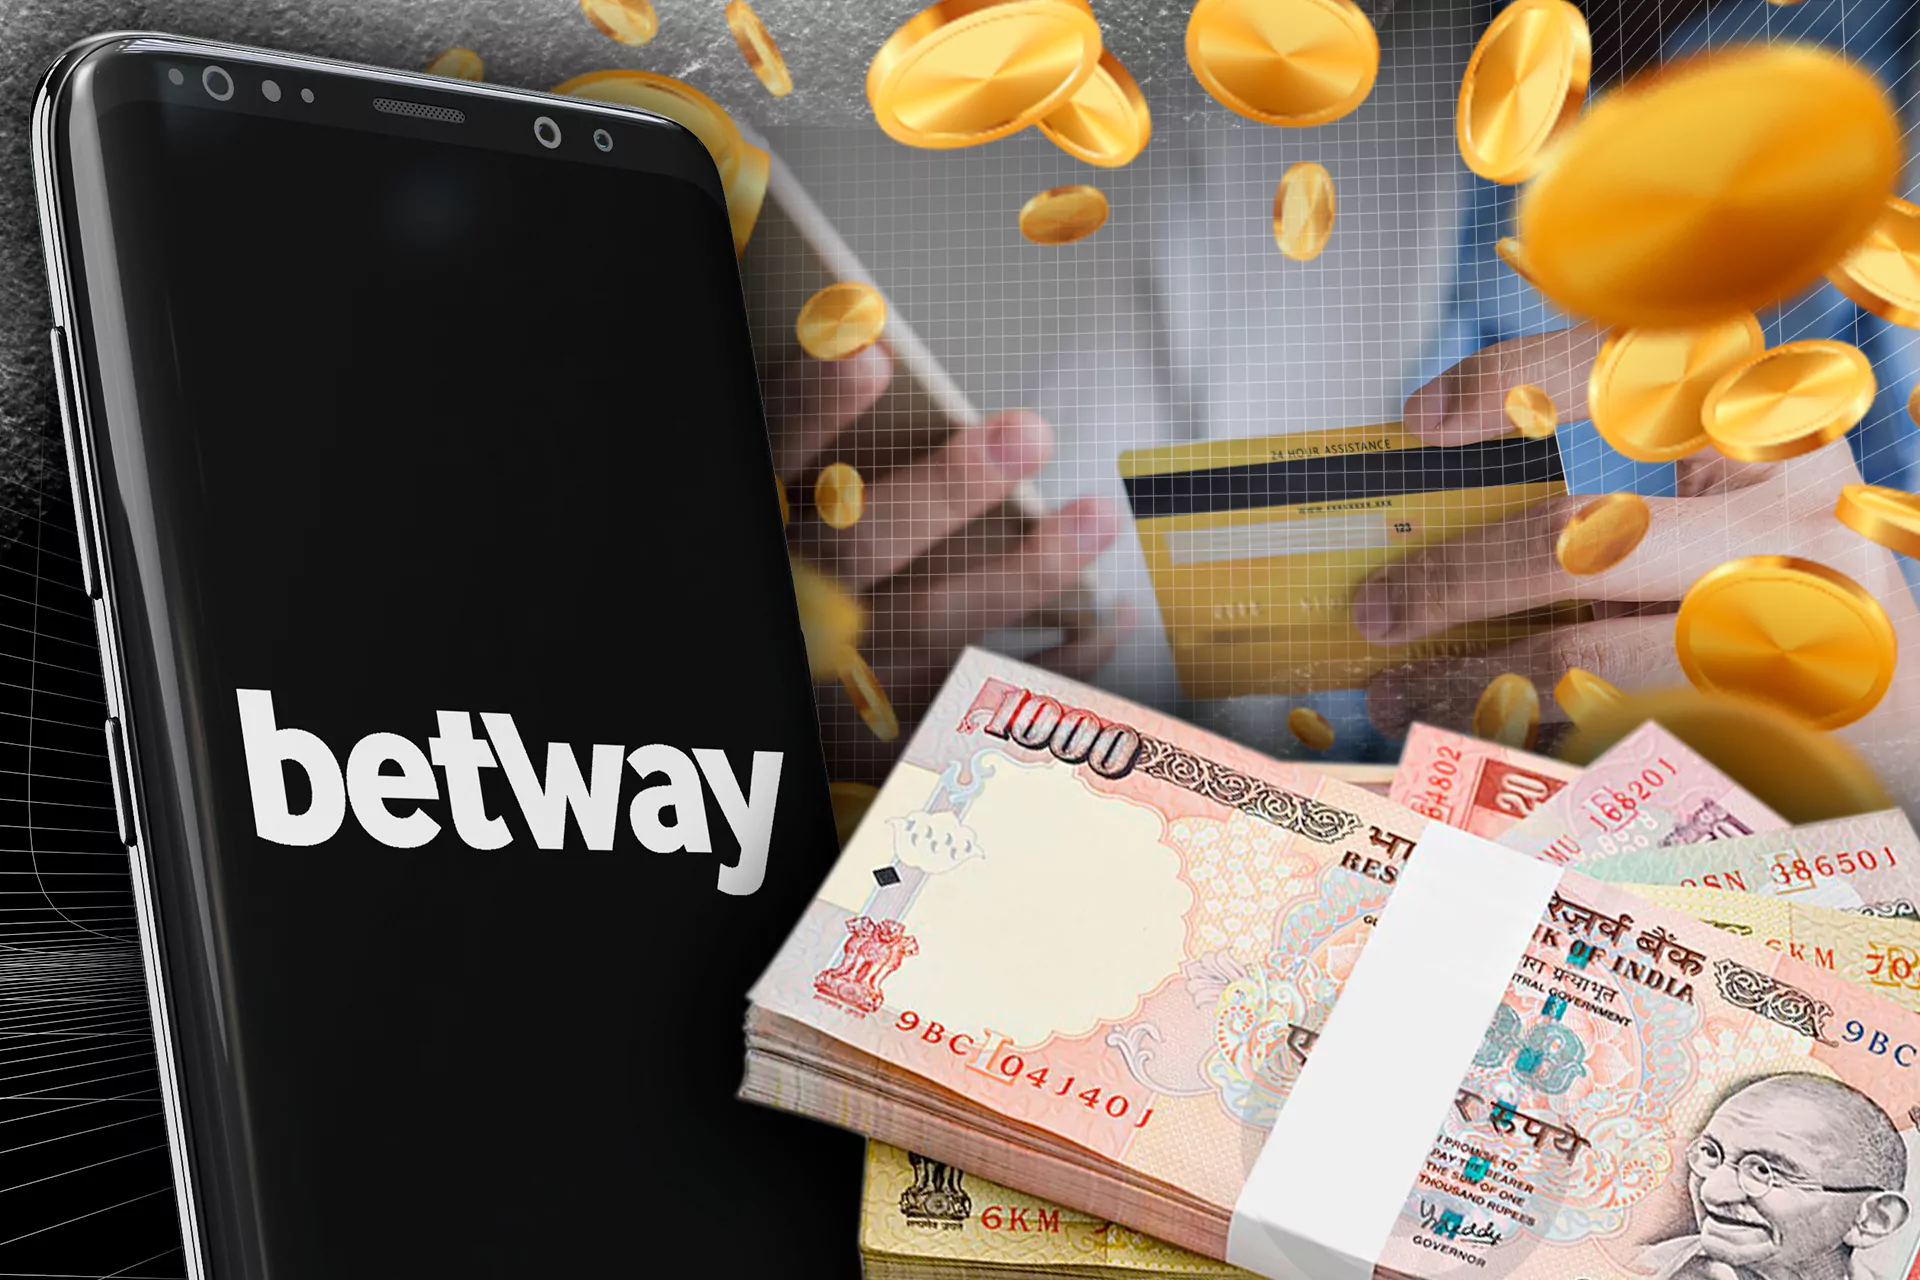 All verified bettors can easily withdraw their winnings.